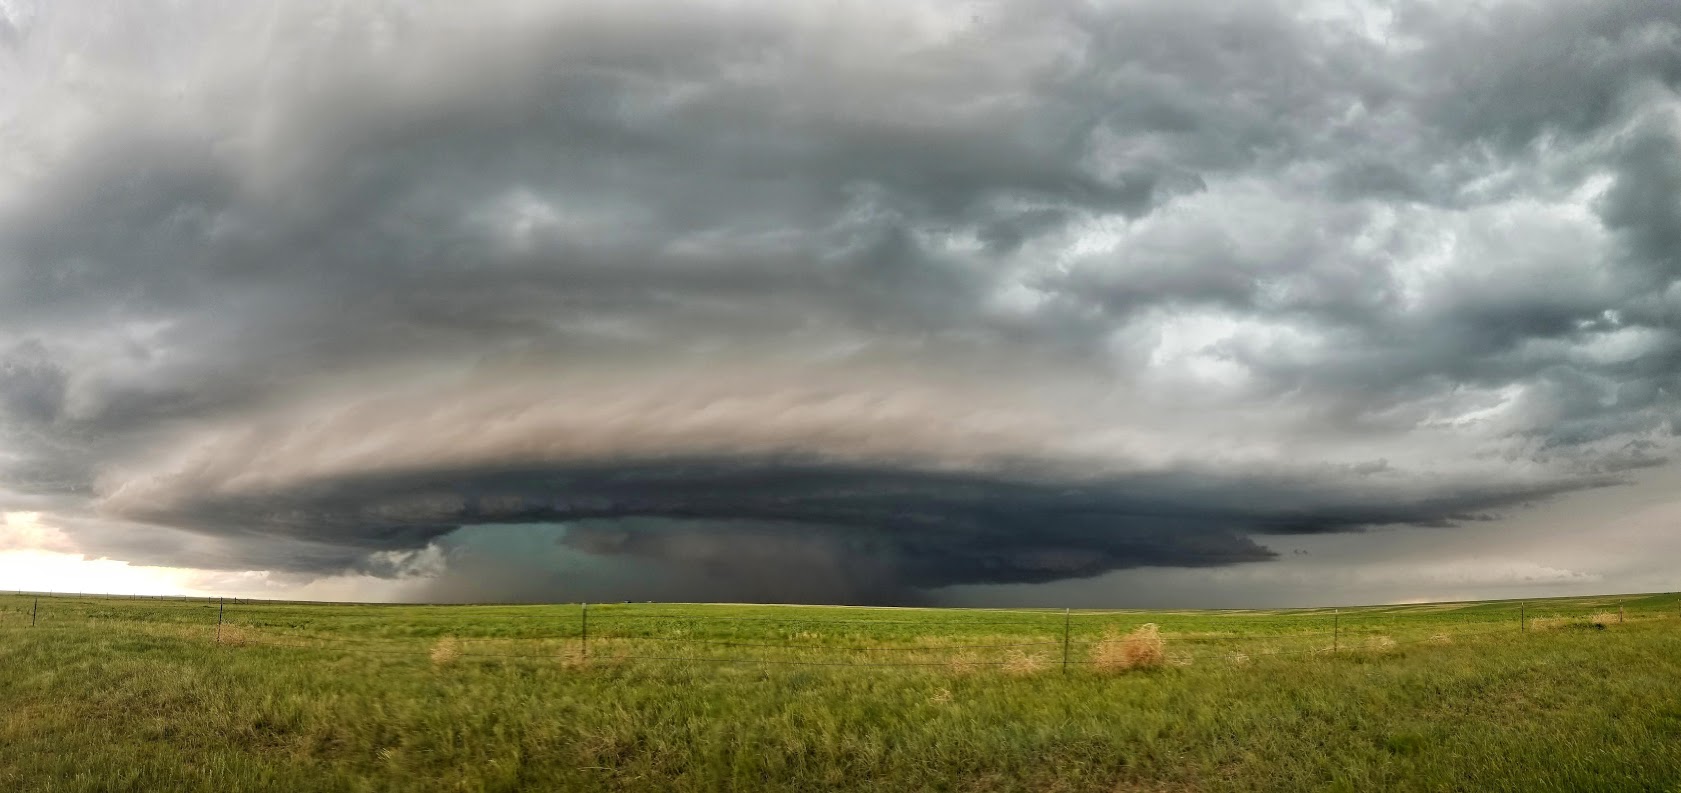 Supercell west of Cheyenne